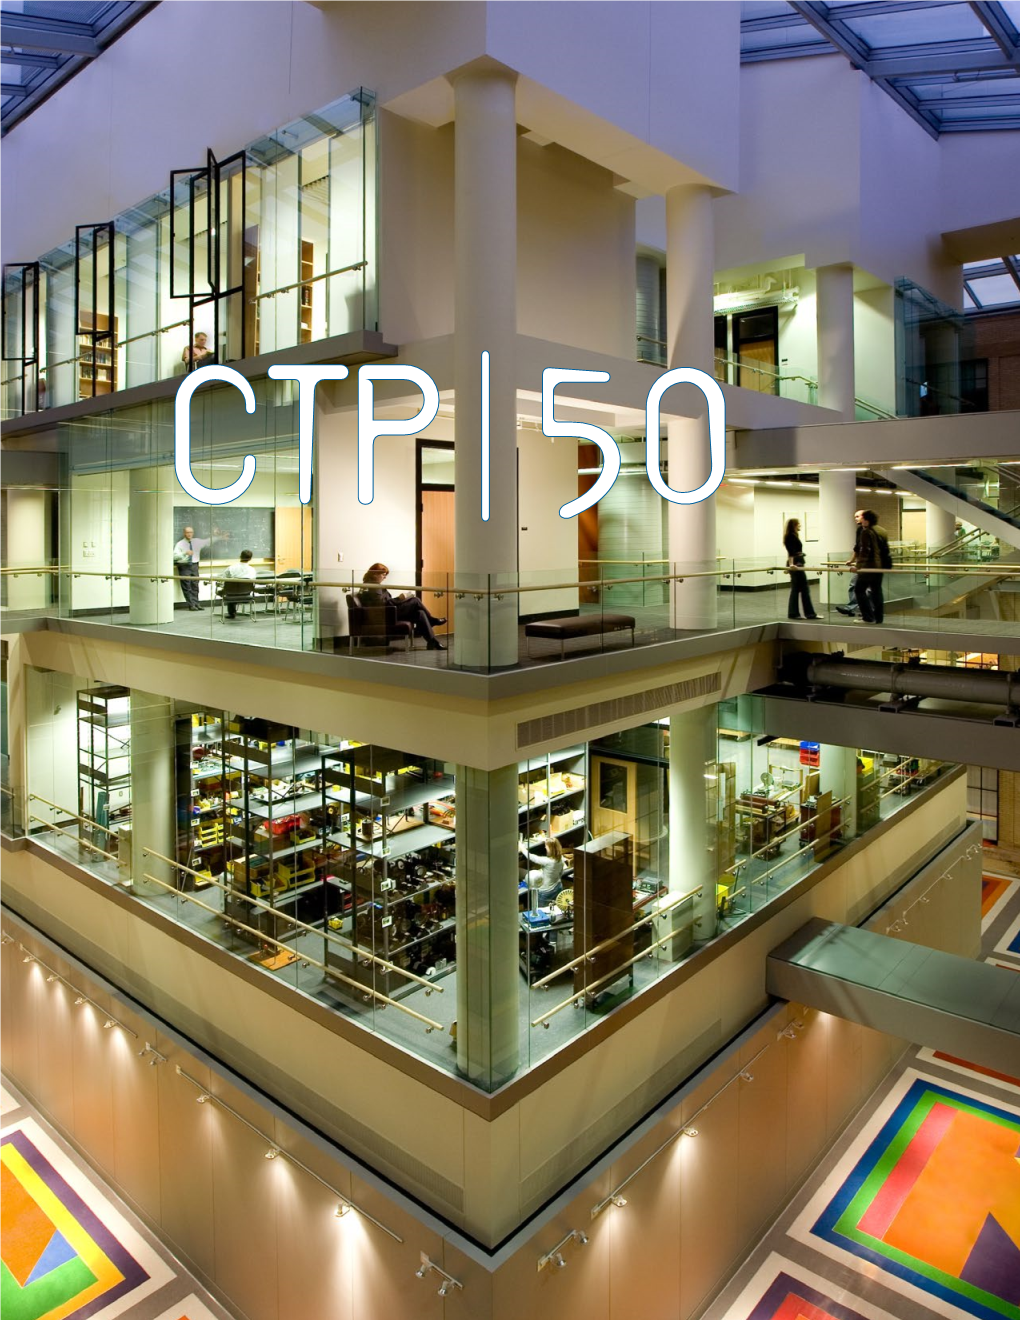 54 ) Ctp | 50 Mit Physics Annual 2018 Center for Theoretical Physics Celebrates 50 Years